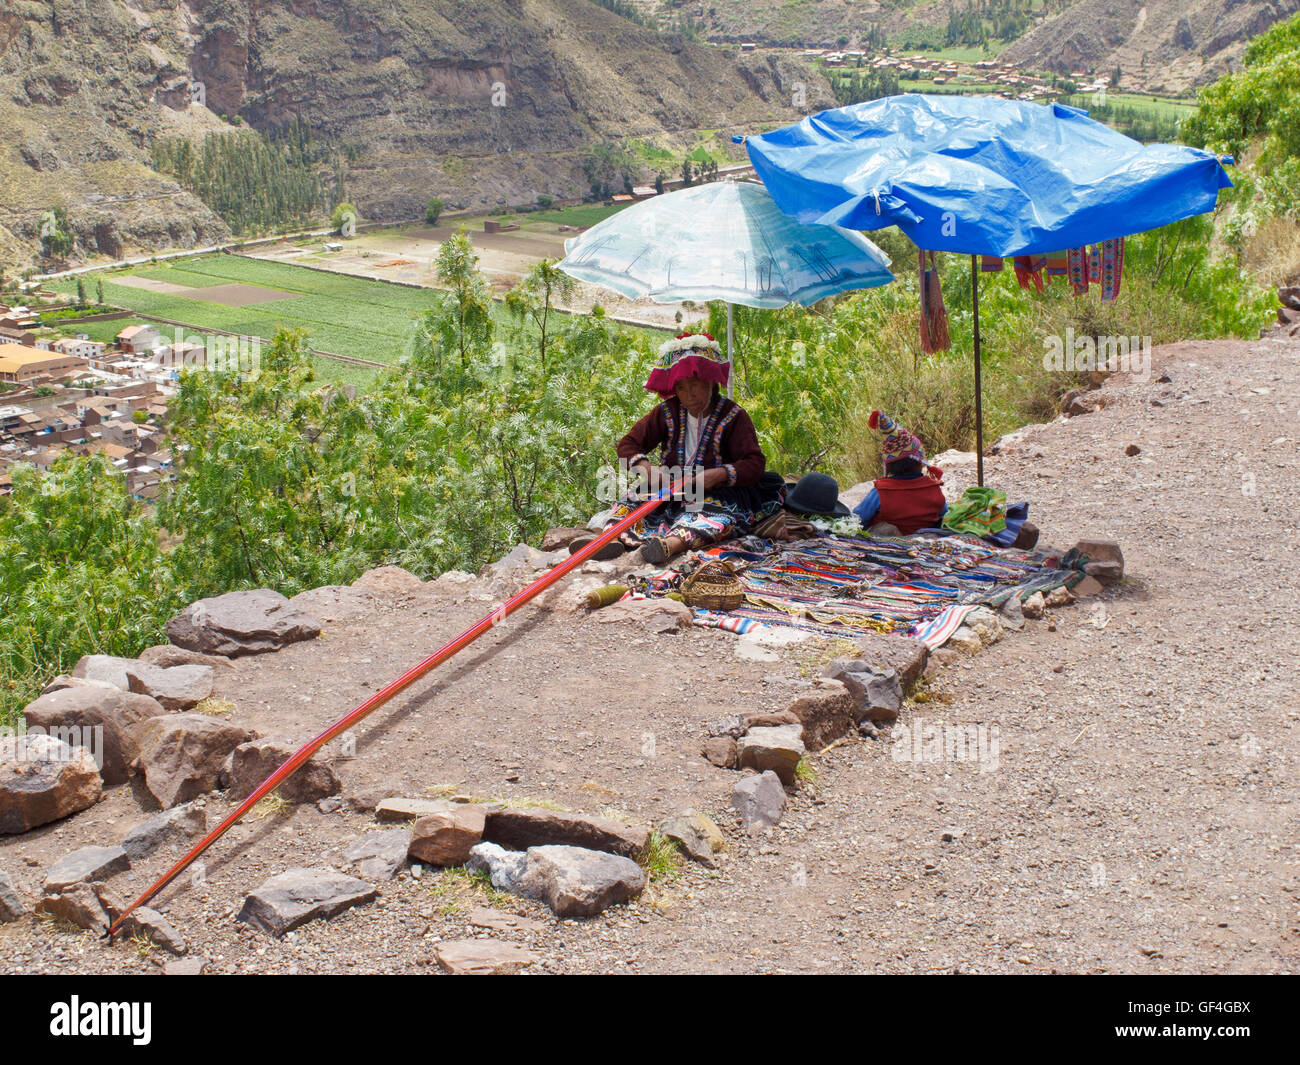 A local Andean woman weaving and selling her handicraft at the valley viewpoint Stock Photo